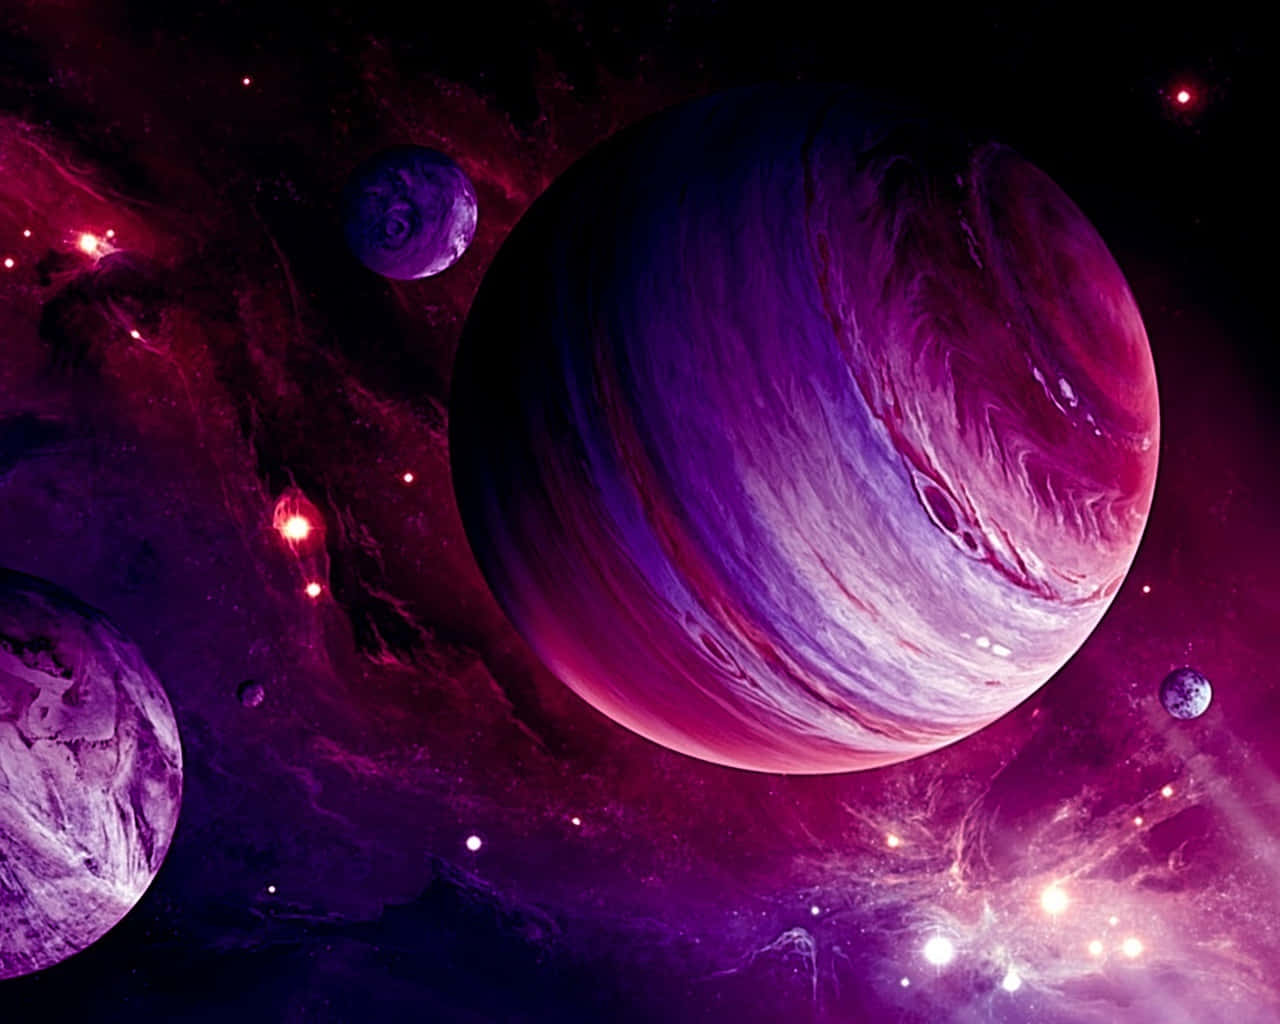 Marvel at the Beauty of the Pink and Purple Galaxy Wallpaper